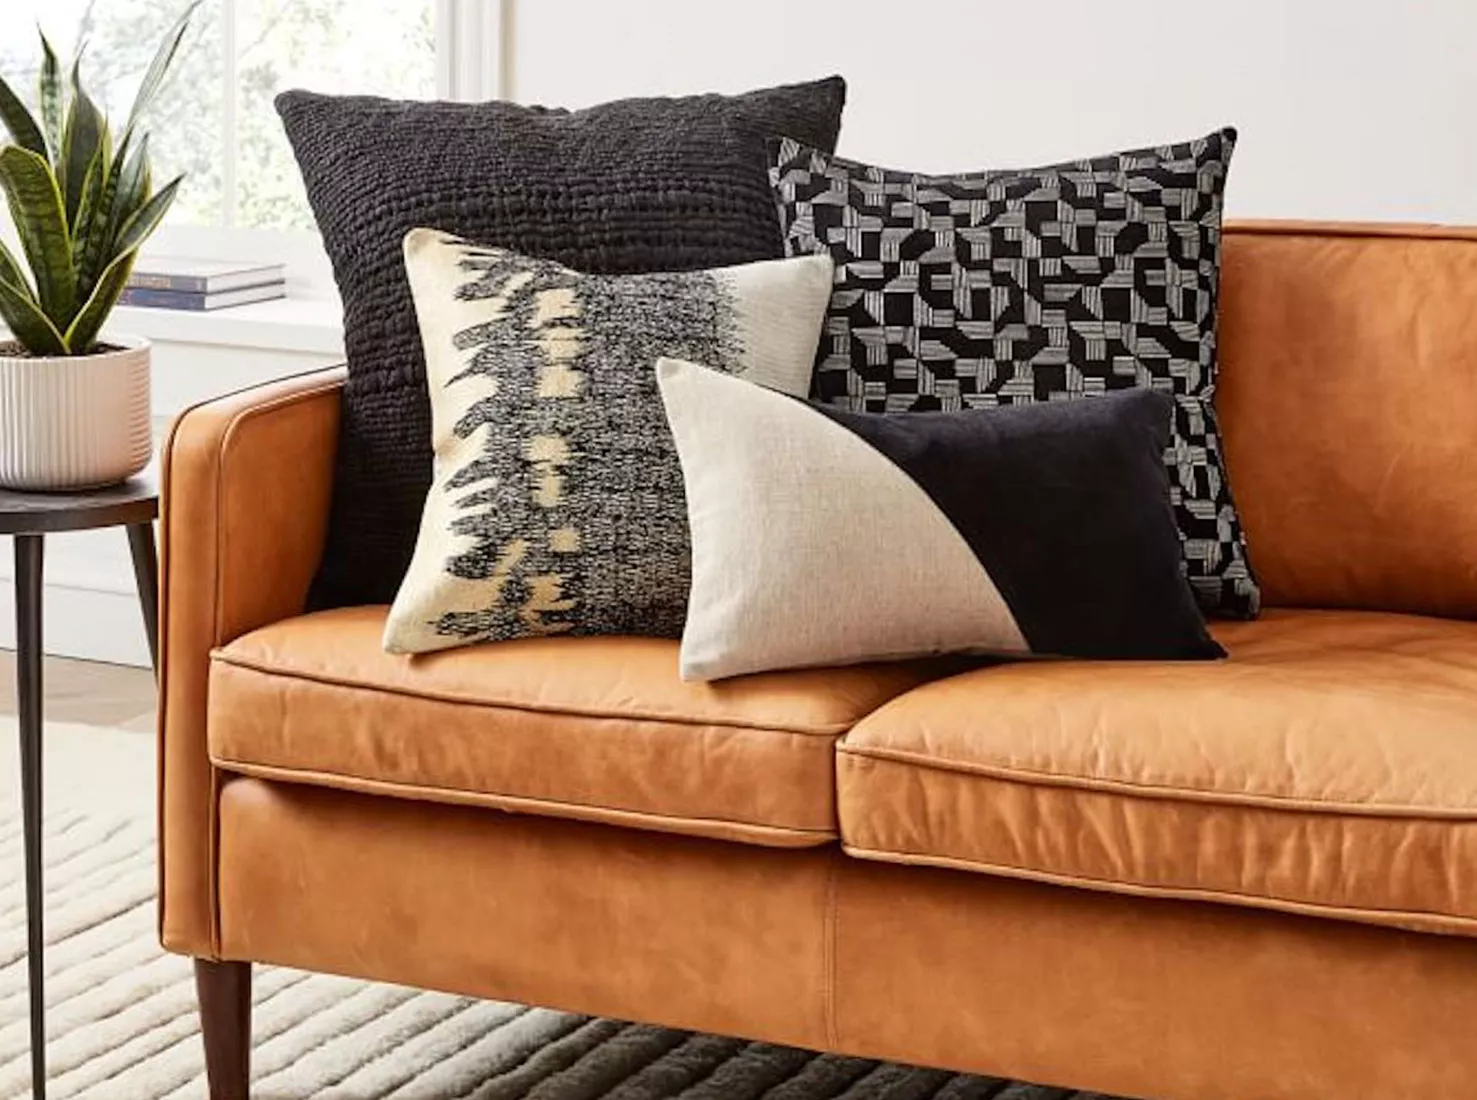 How to Soften a Couch Cushion